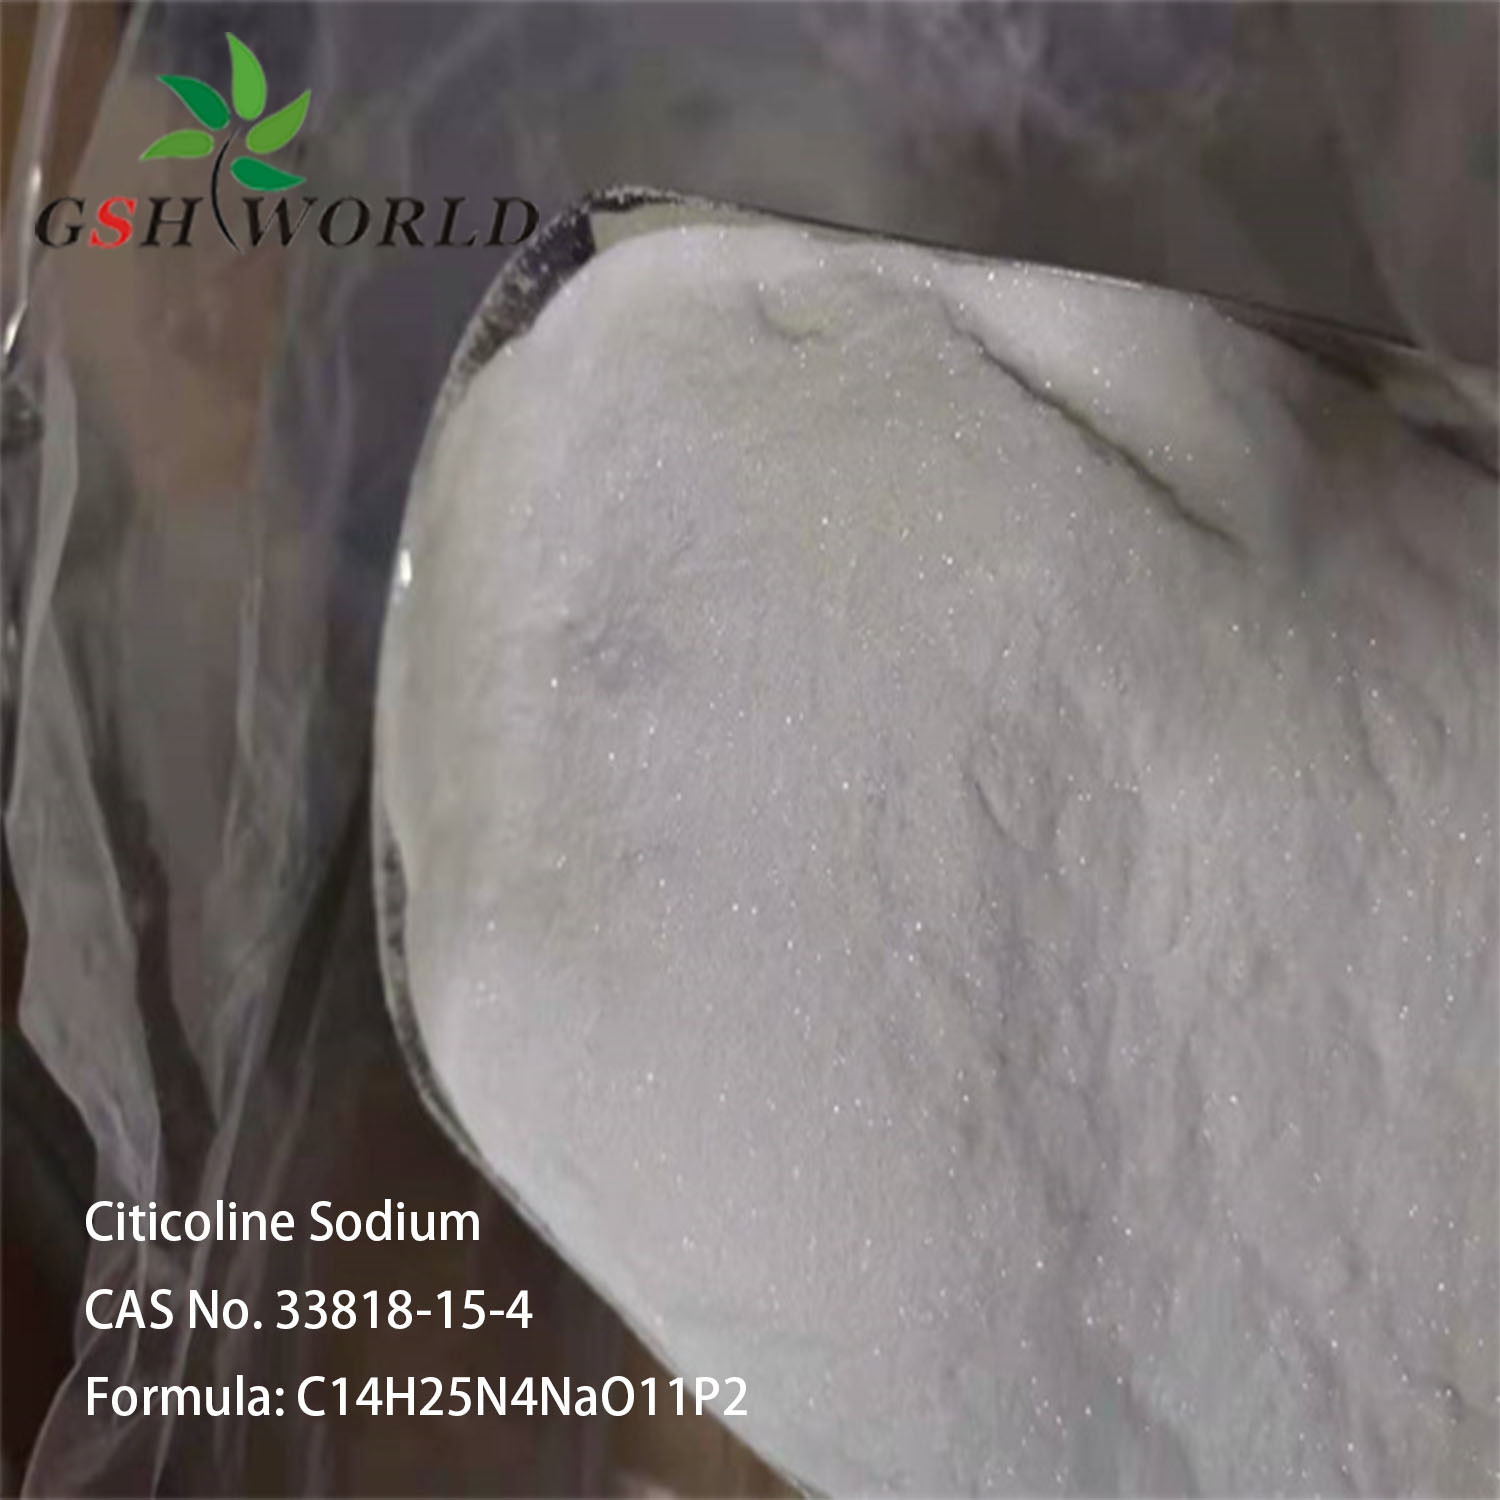 98% Citicoline Sodium, Factory Supply Pharmaceutical Raw Material CAS 33818-15-4 suppliers & manufacturers in China